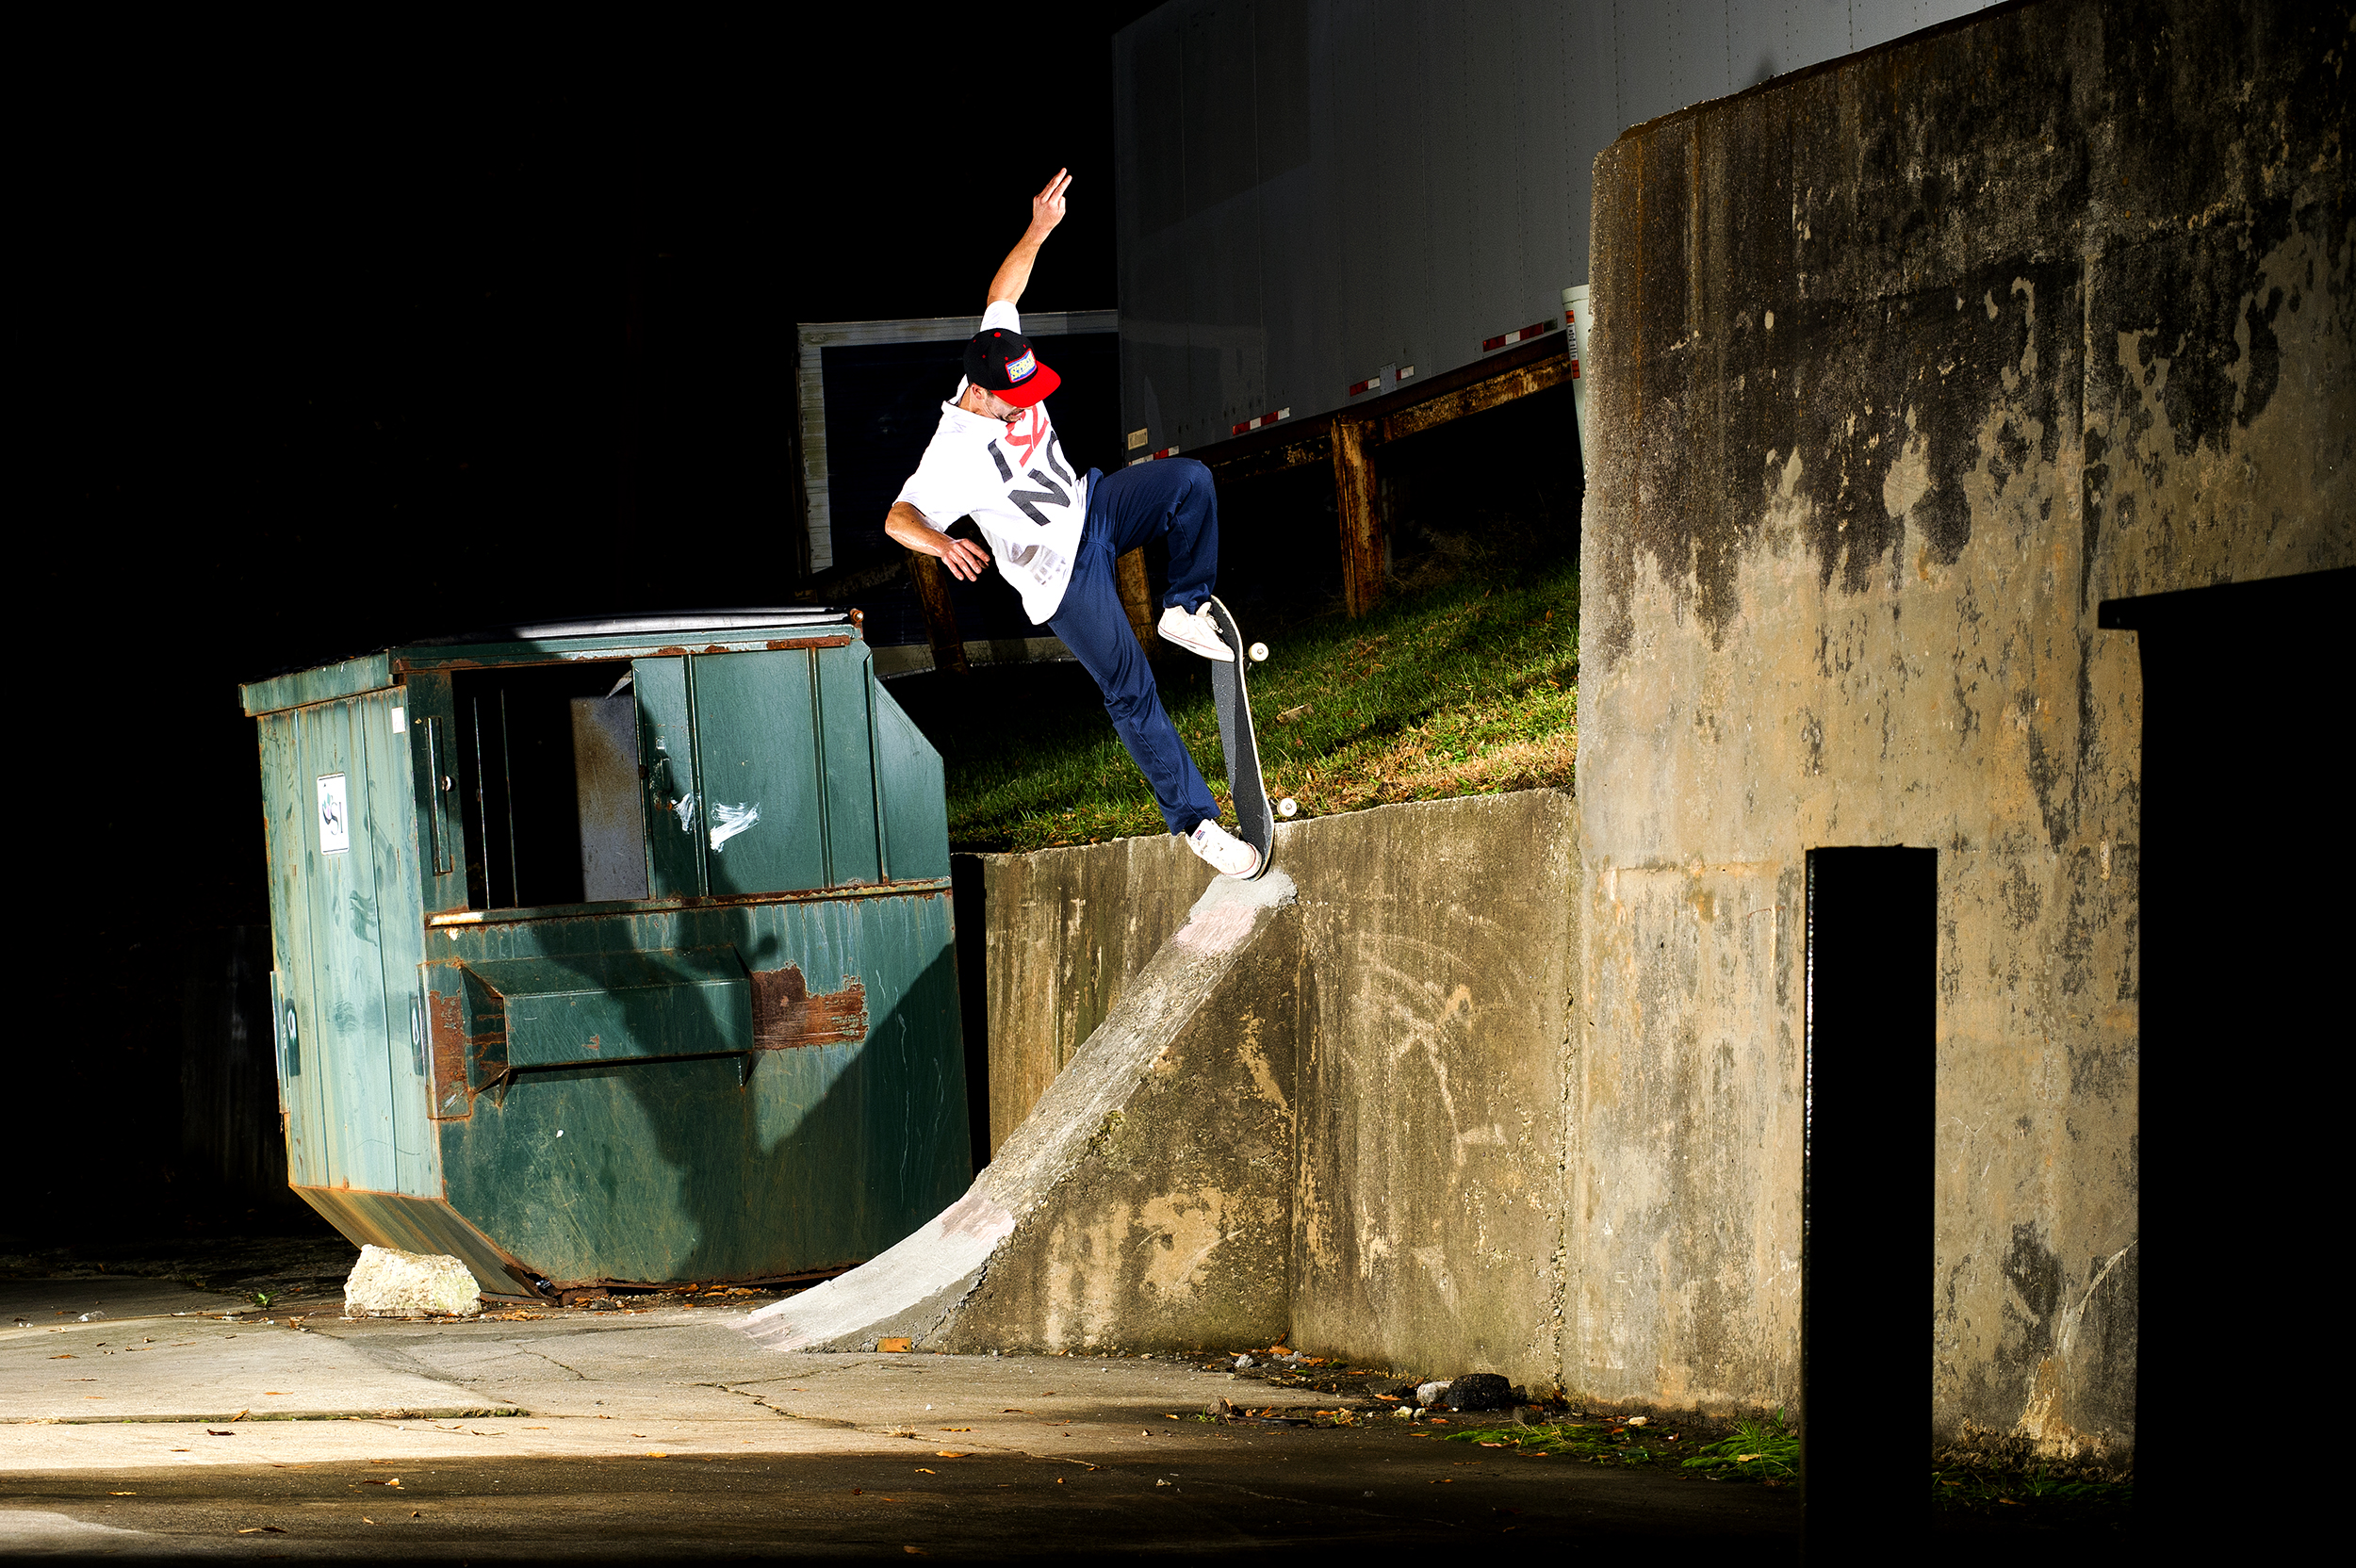 Jed_Shooter_Blunt_to_Fakie-1.jpg